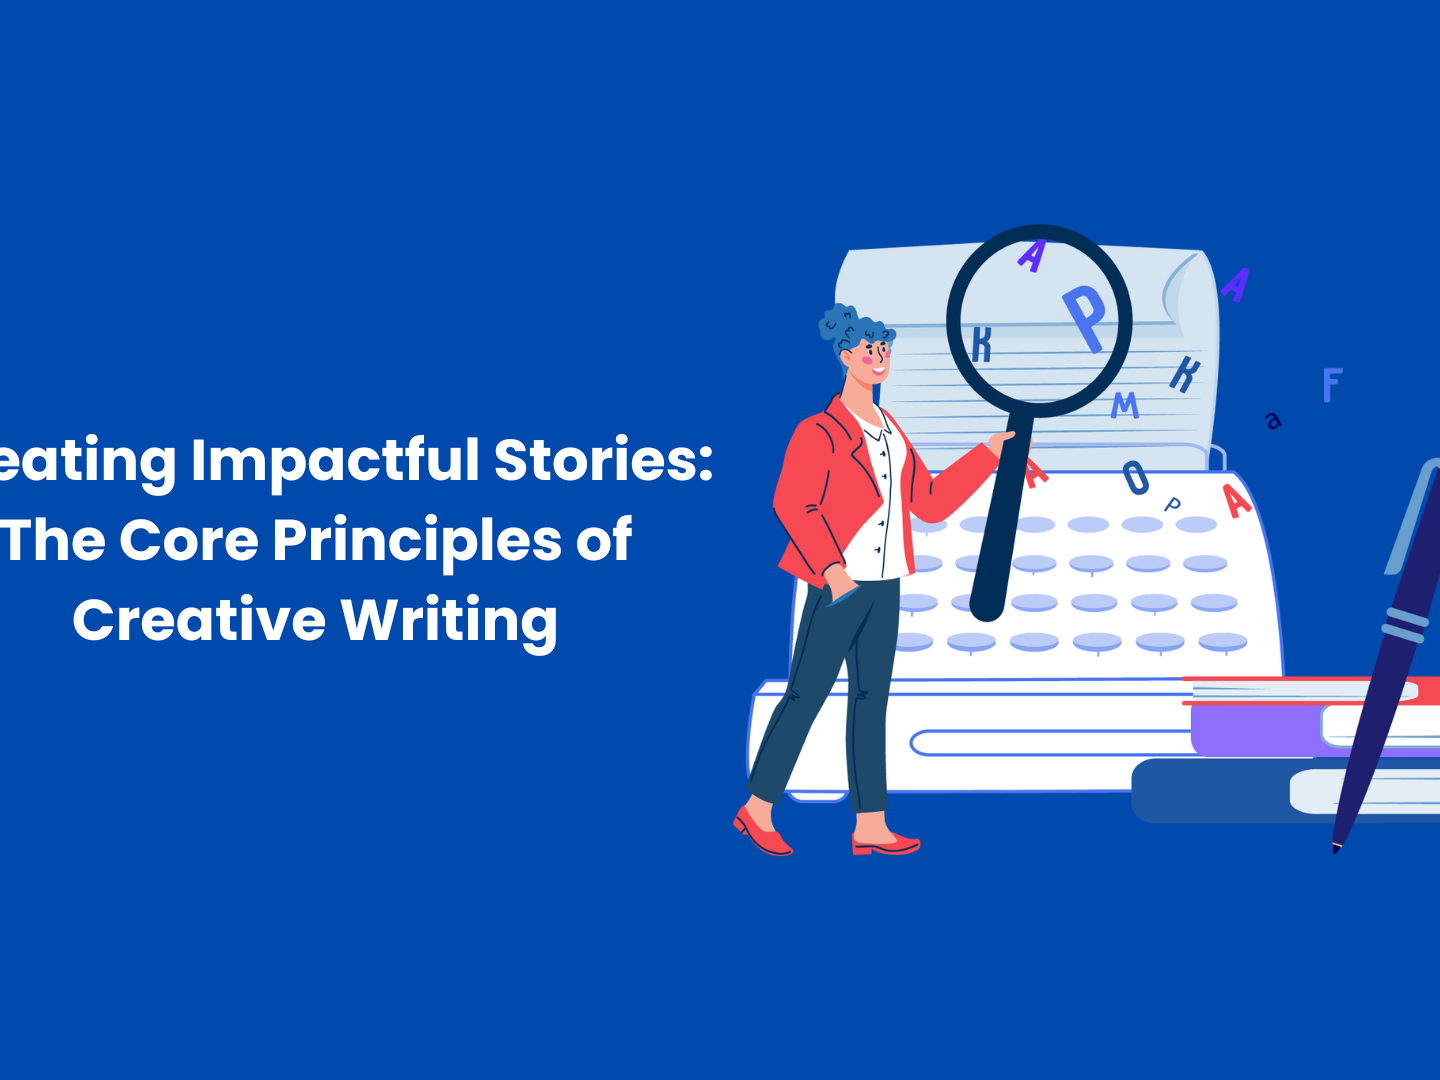 Creating Impactful Stories: The Core Principles of Creative Writing